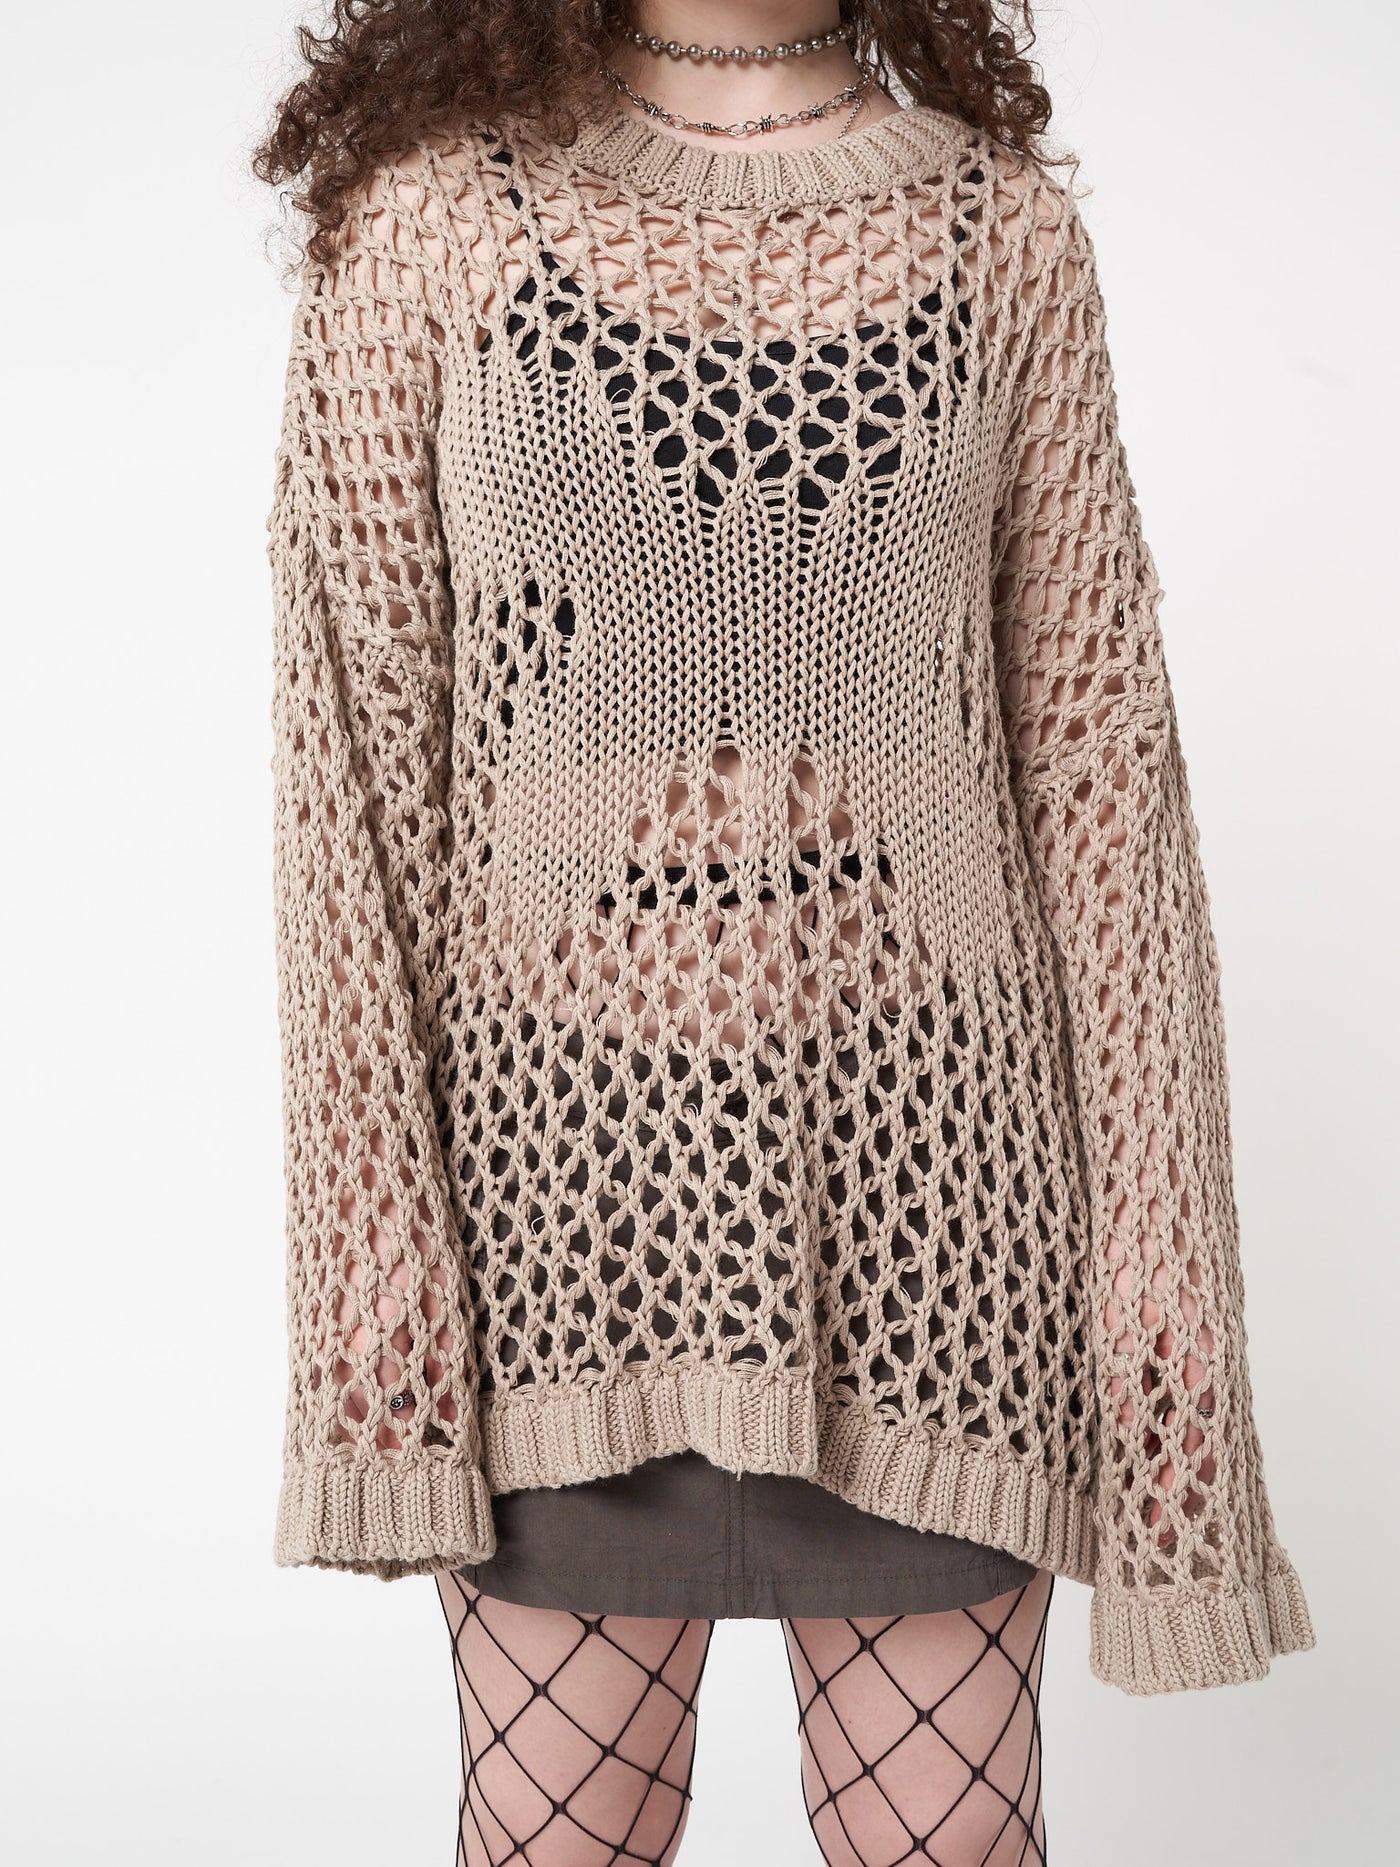 Open knit jumper in beige with butterfly front design and crochet net style